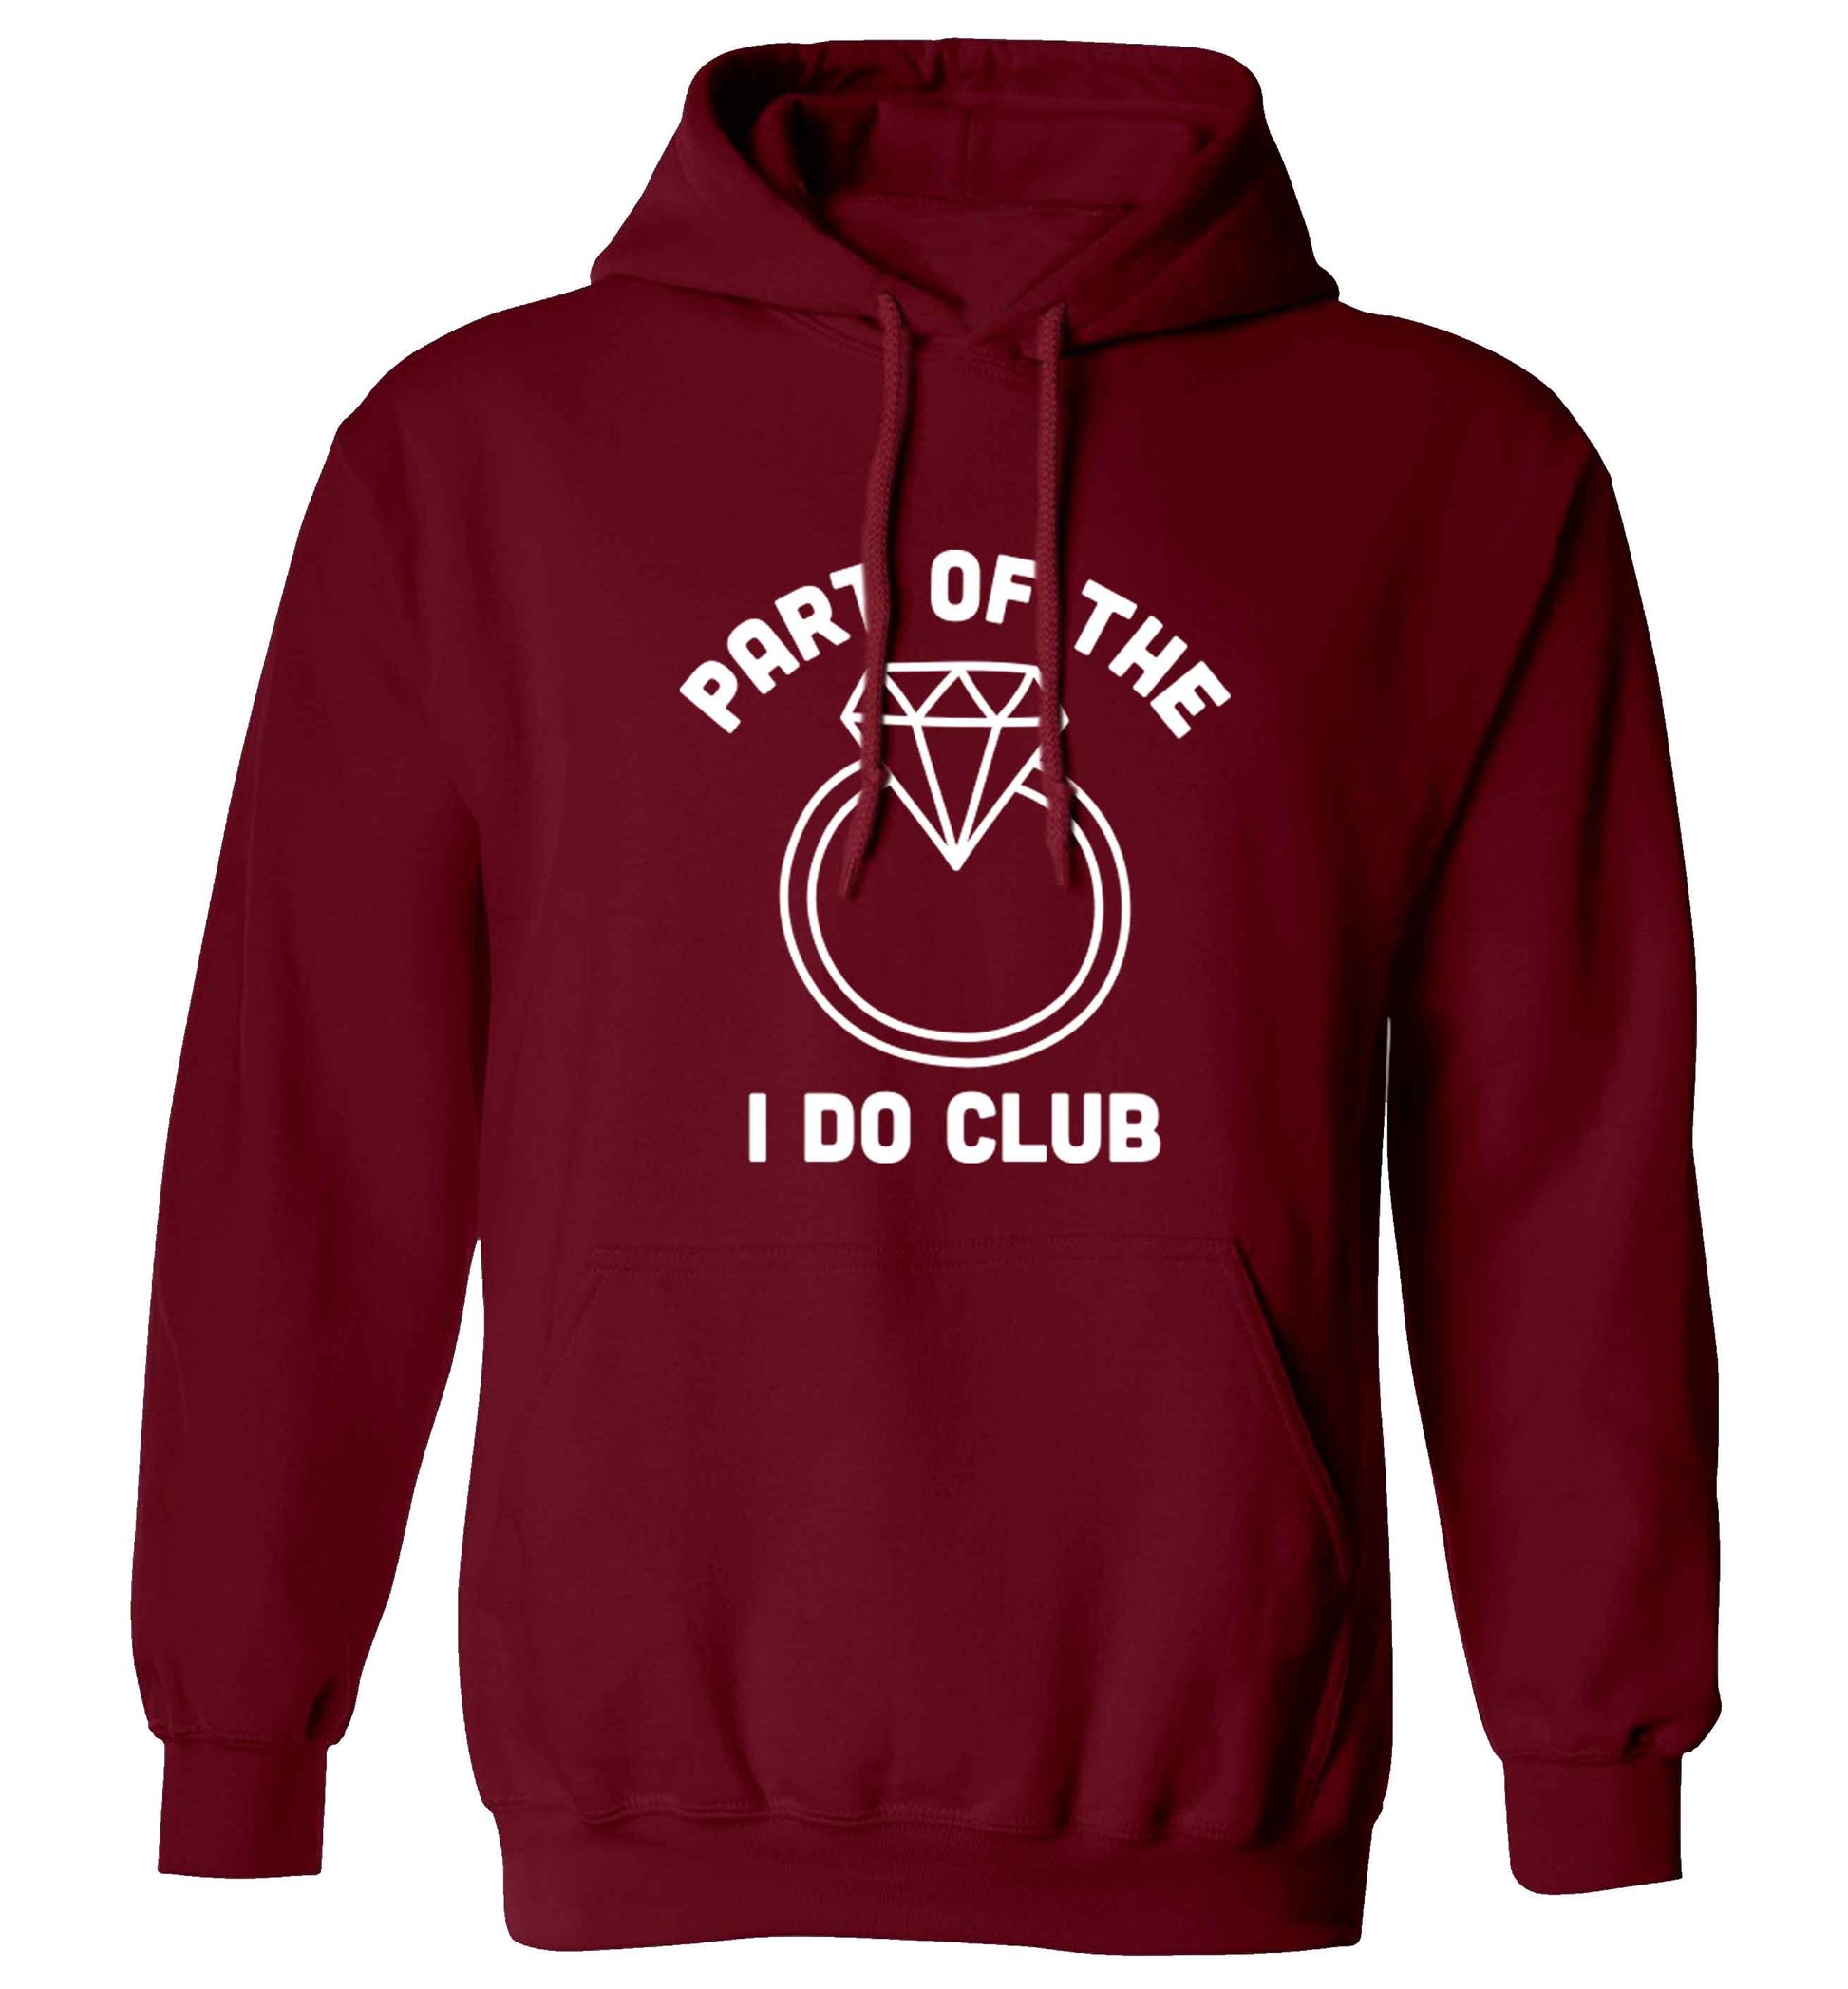 Part of the I do club adults unisex maroon hoodie 2XL